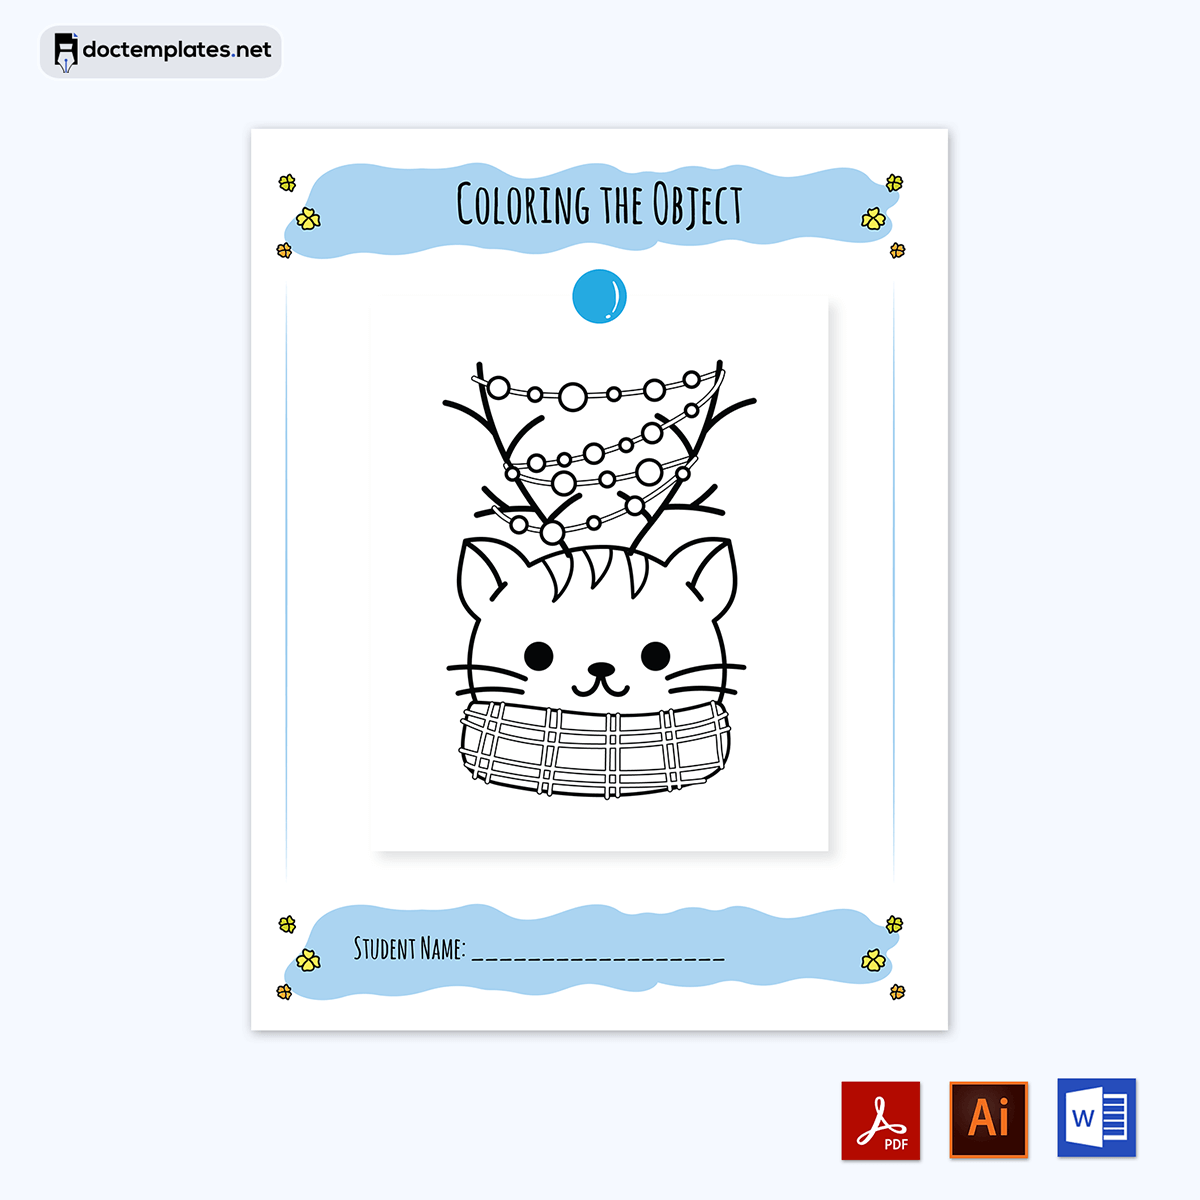 Image of Preschool coloring pages pdf
Preschool coloring pages pdf
 02